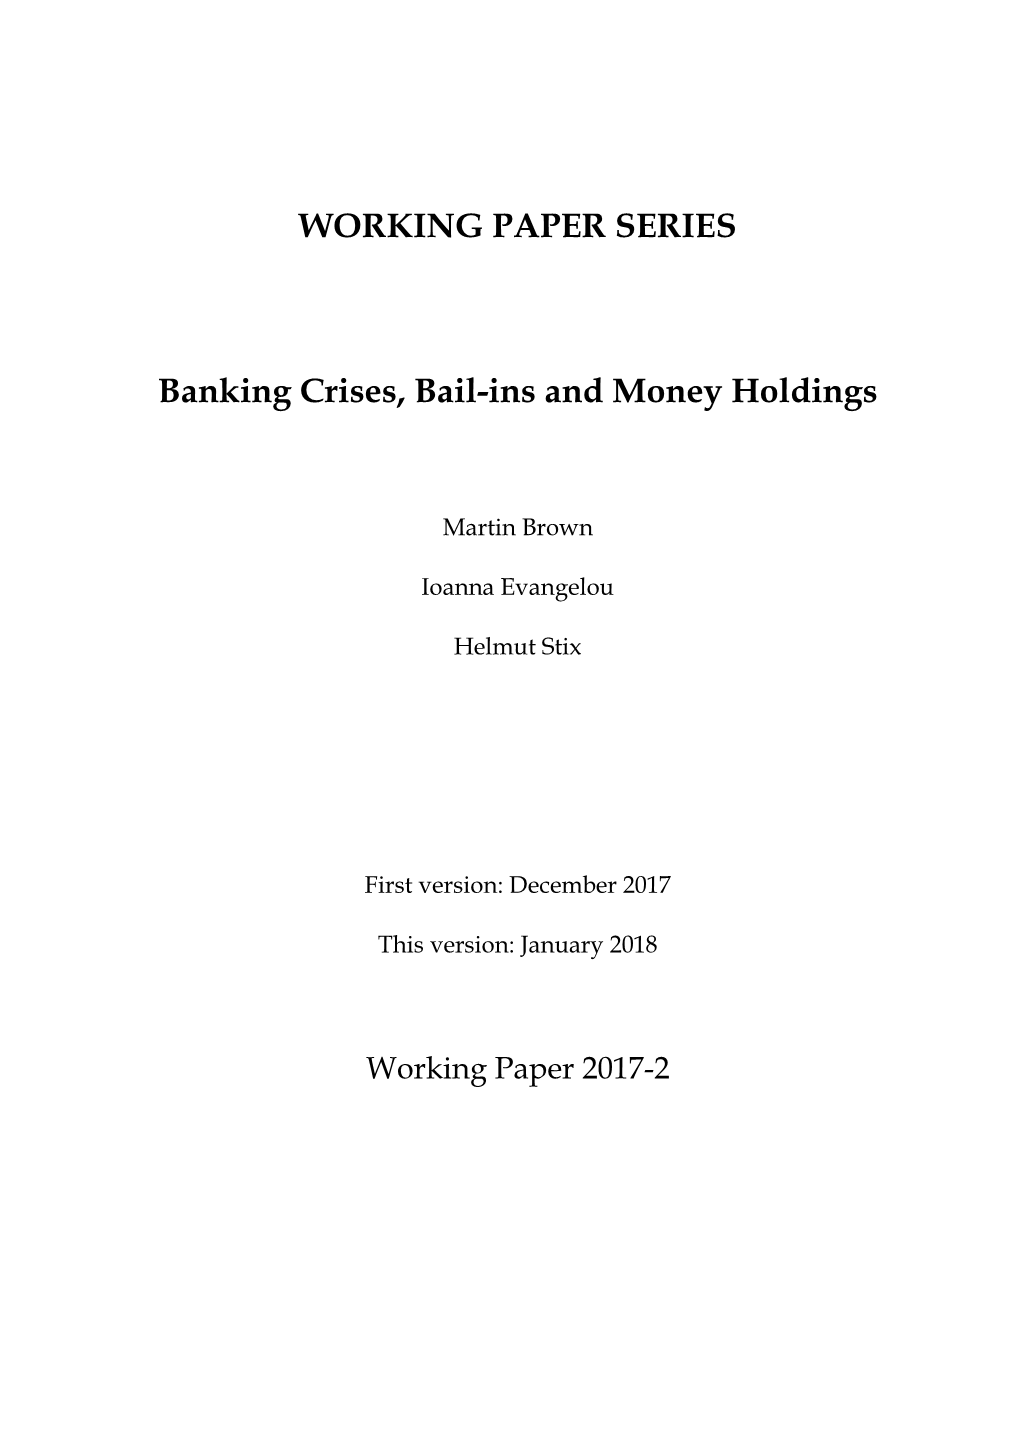 WORKING PAPER SERIES Banking Crises, Bail-Ins and Money Holdings